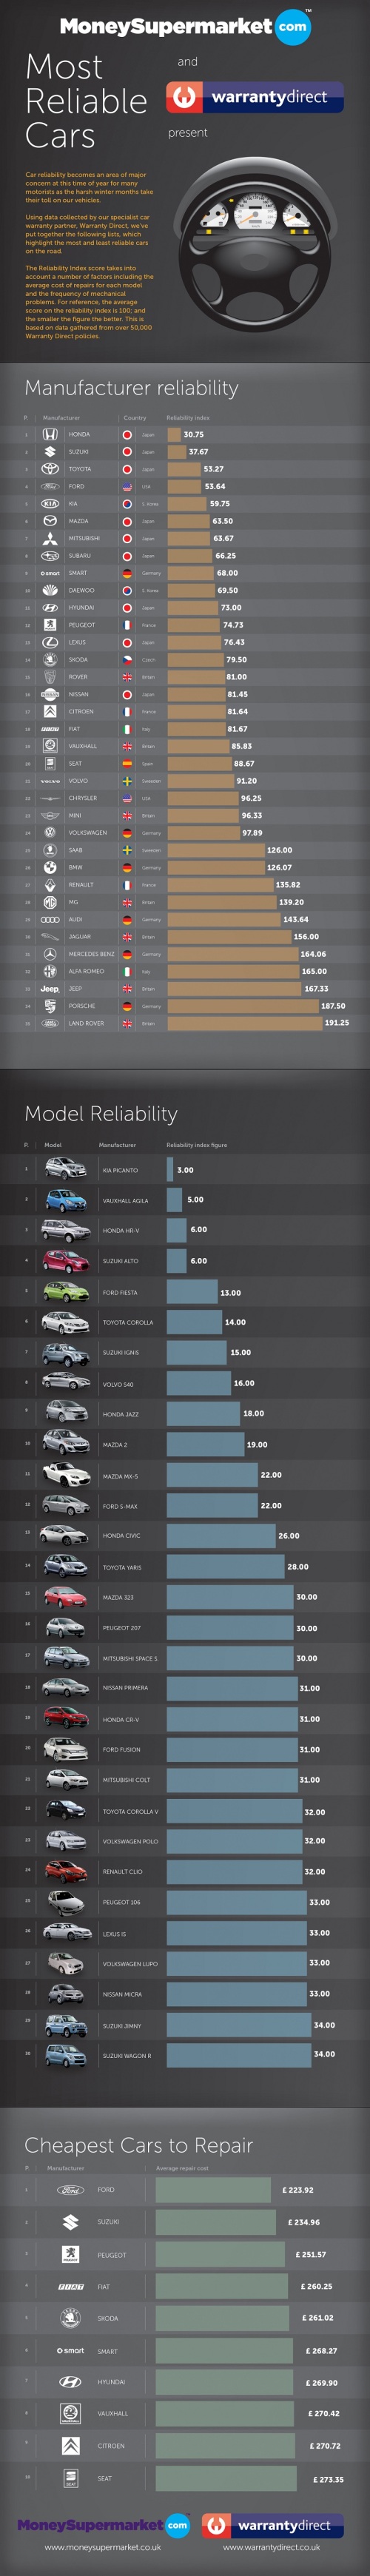 Most Reliable Cars infographic